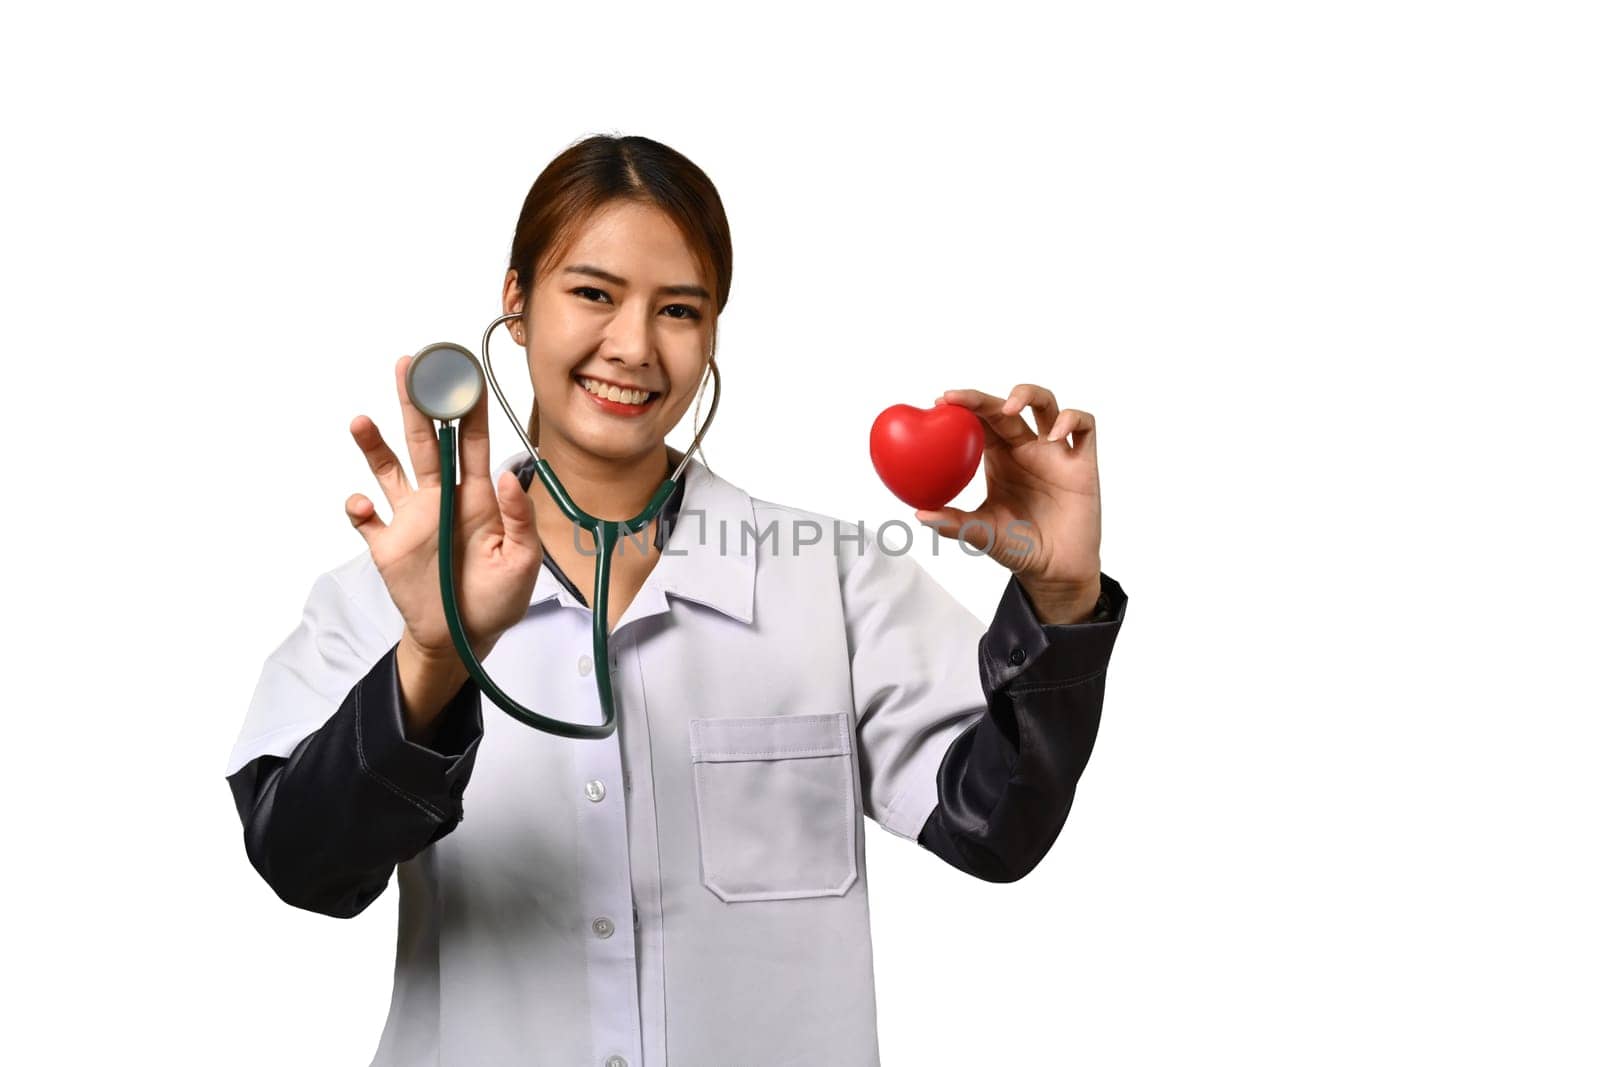 Image of female doctor holding stethoscope and red heart isolated white background. Cardiology, medicine and healthcare concept.